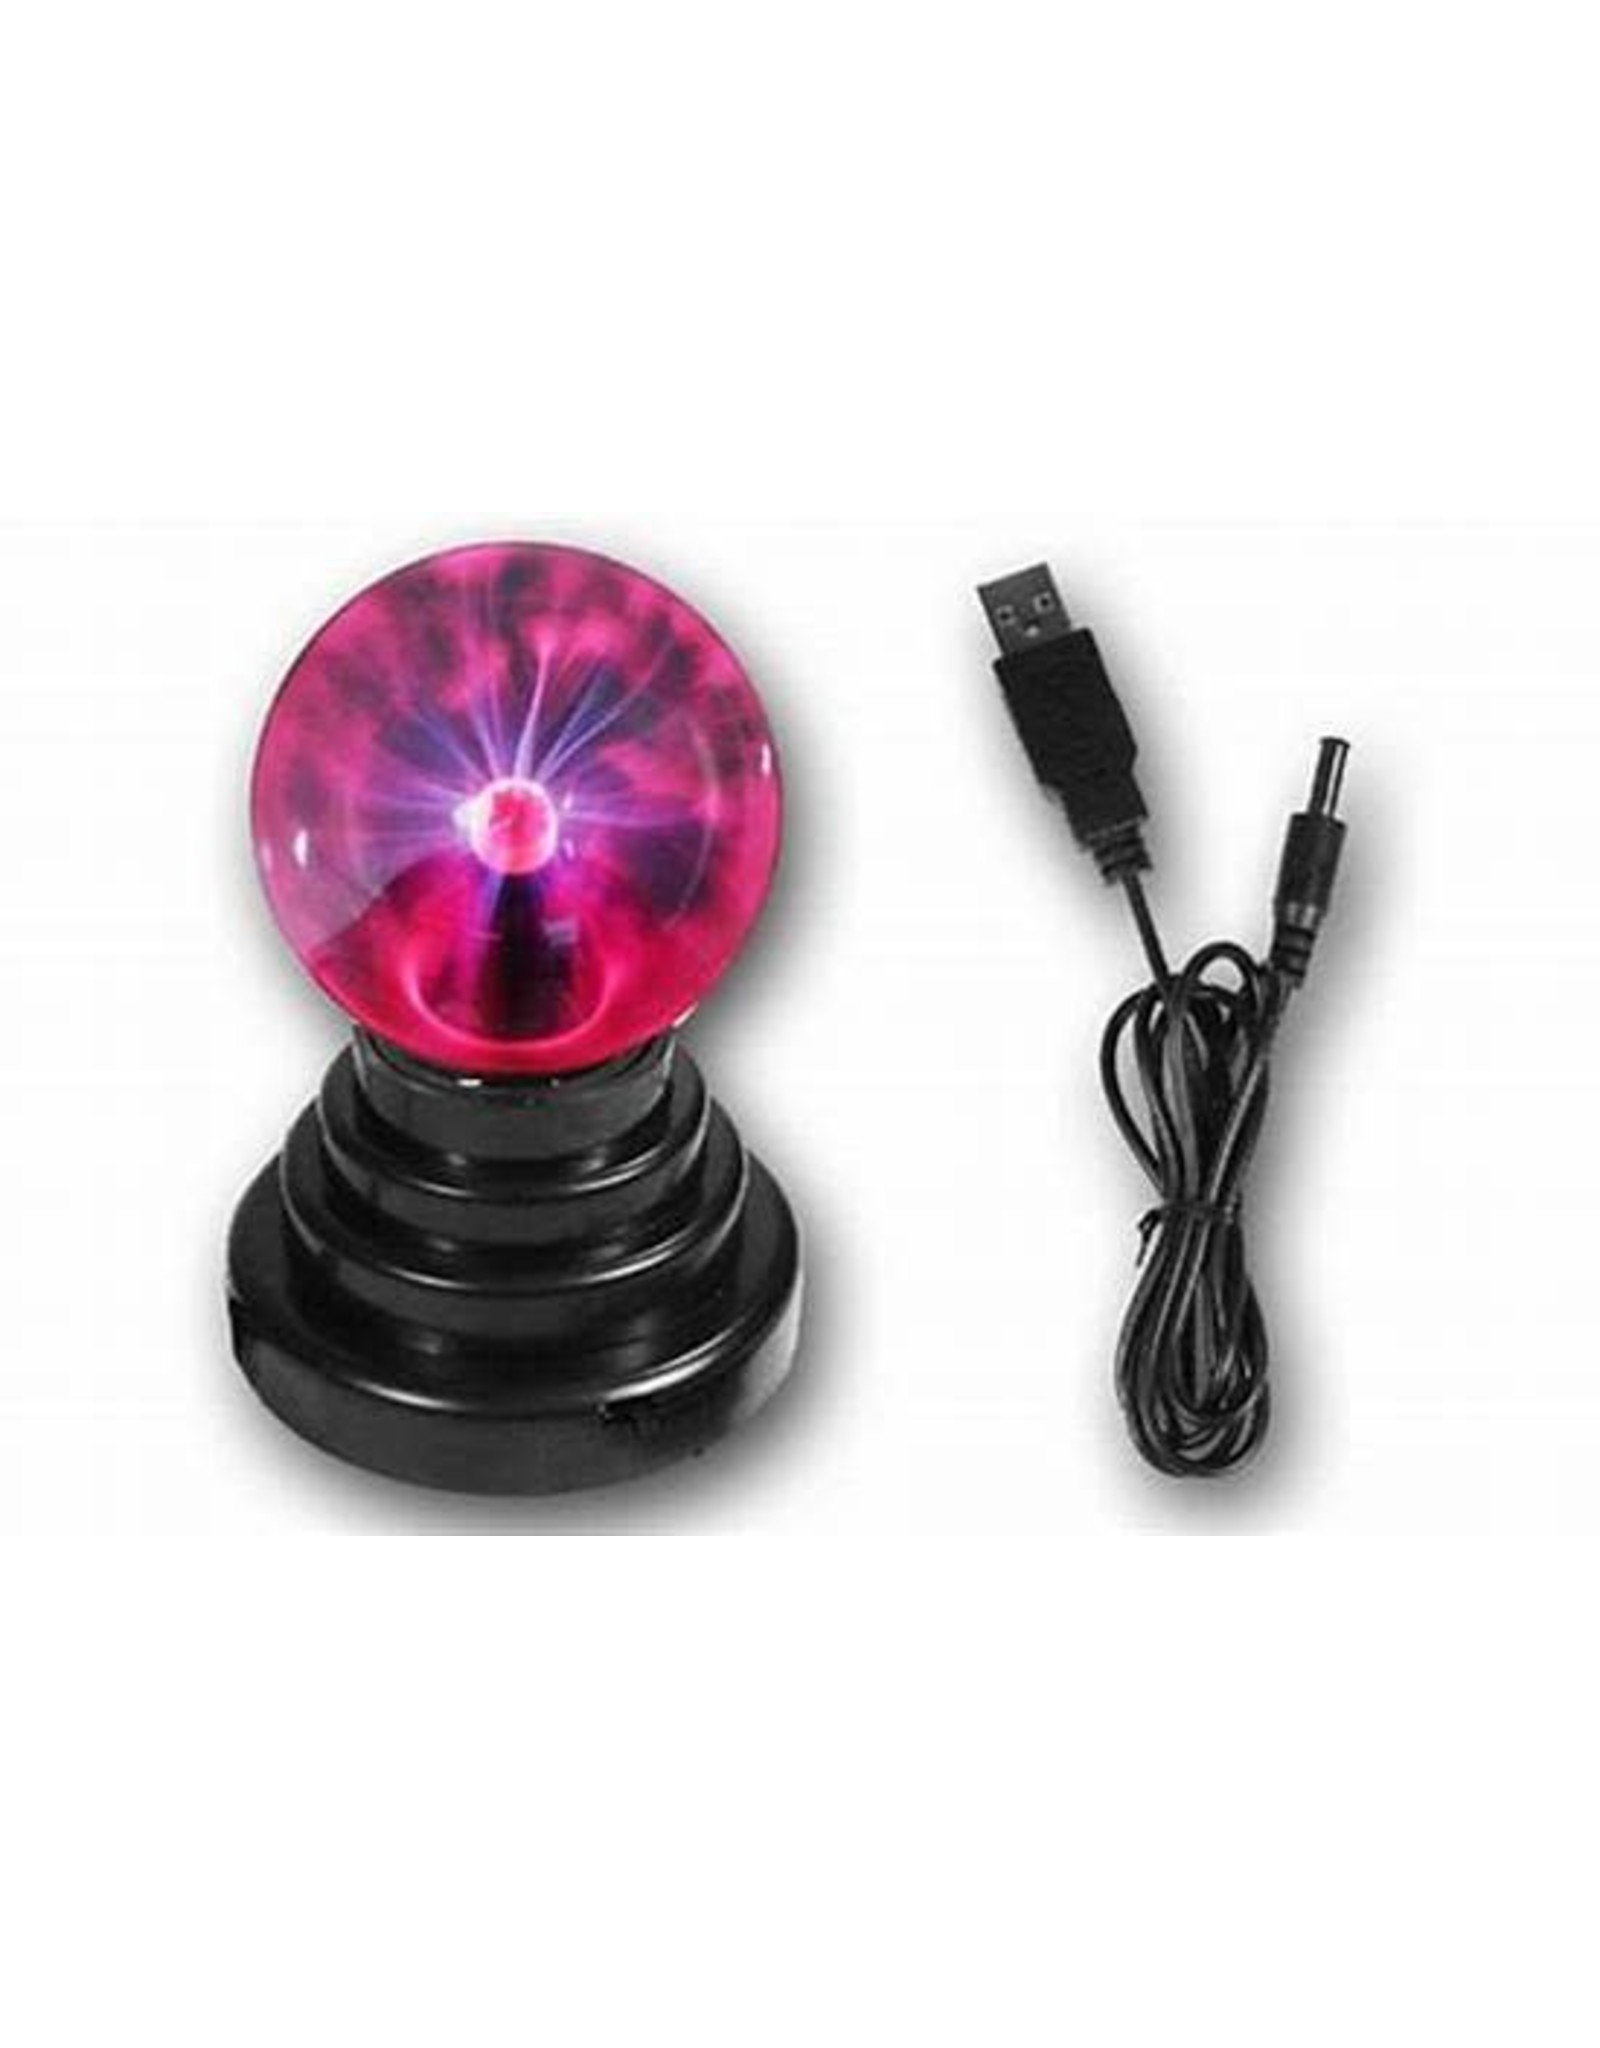 Plasma Ball (Small) with USB Cord - Concepts & Telescope Solutions